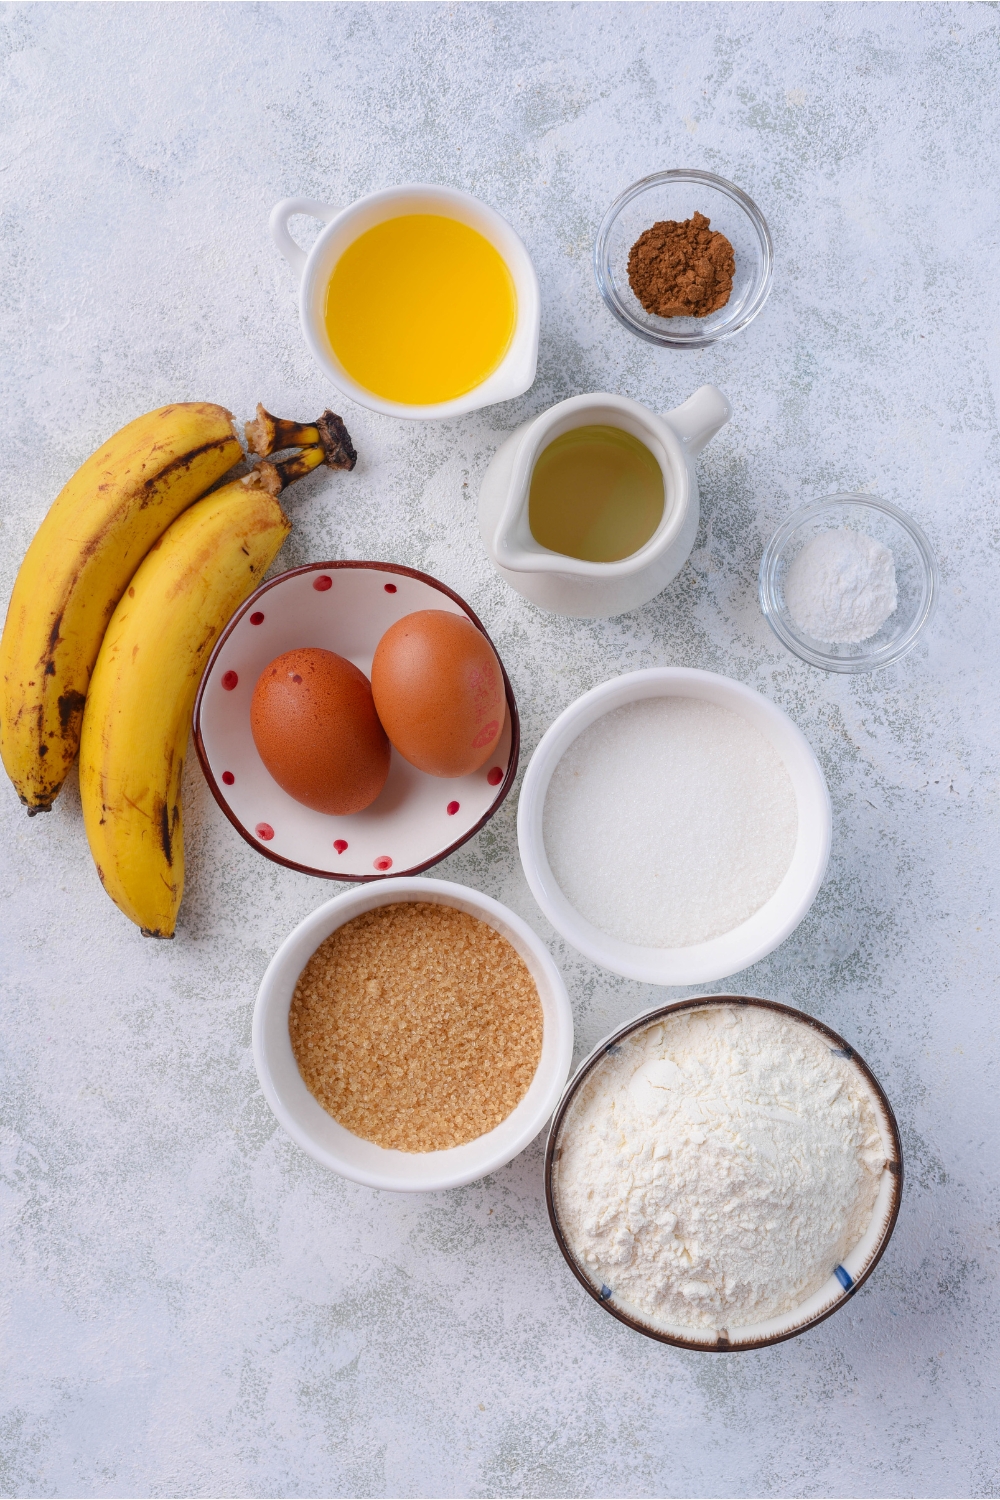 An assortment of ingredients including two bananas and bowls of eggs, cinnamon, sugar, brown sugar, flower, baking powder, melted butter, and oil.